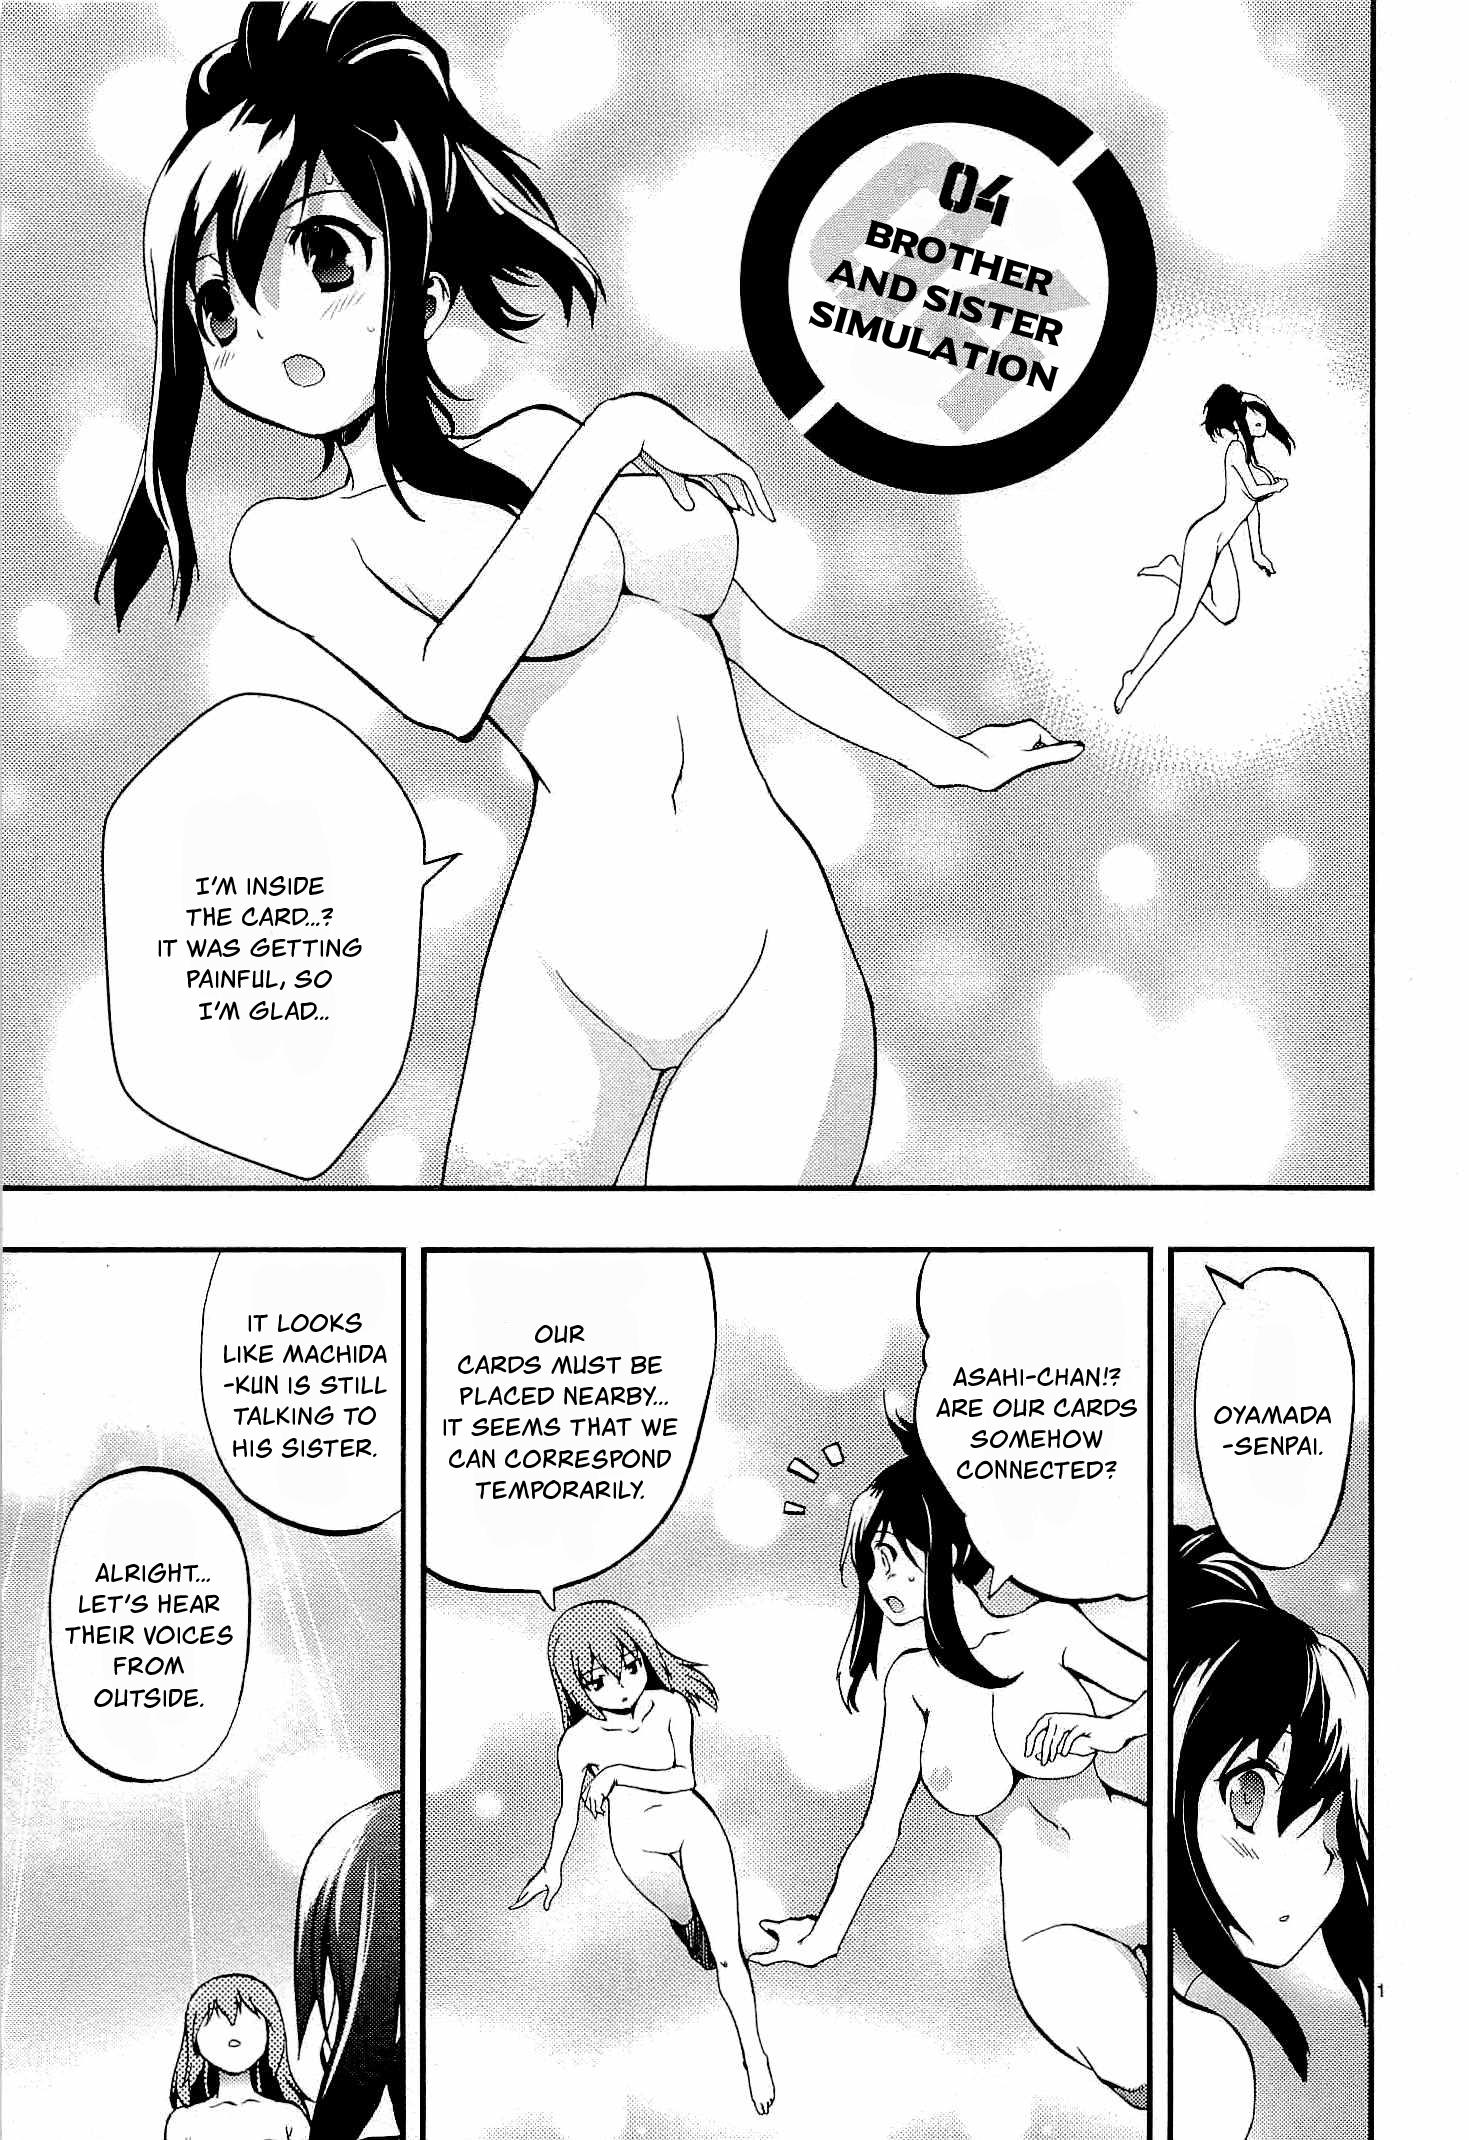 Card Girl! Maiden Summoning Undressing Wars Vol.1 Chapter 4: Brother And Sister Simulation - Picture 1